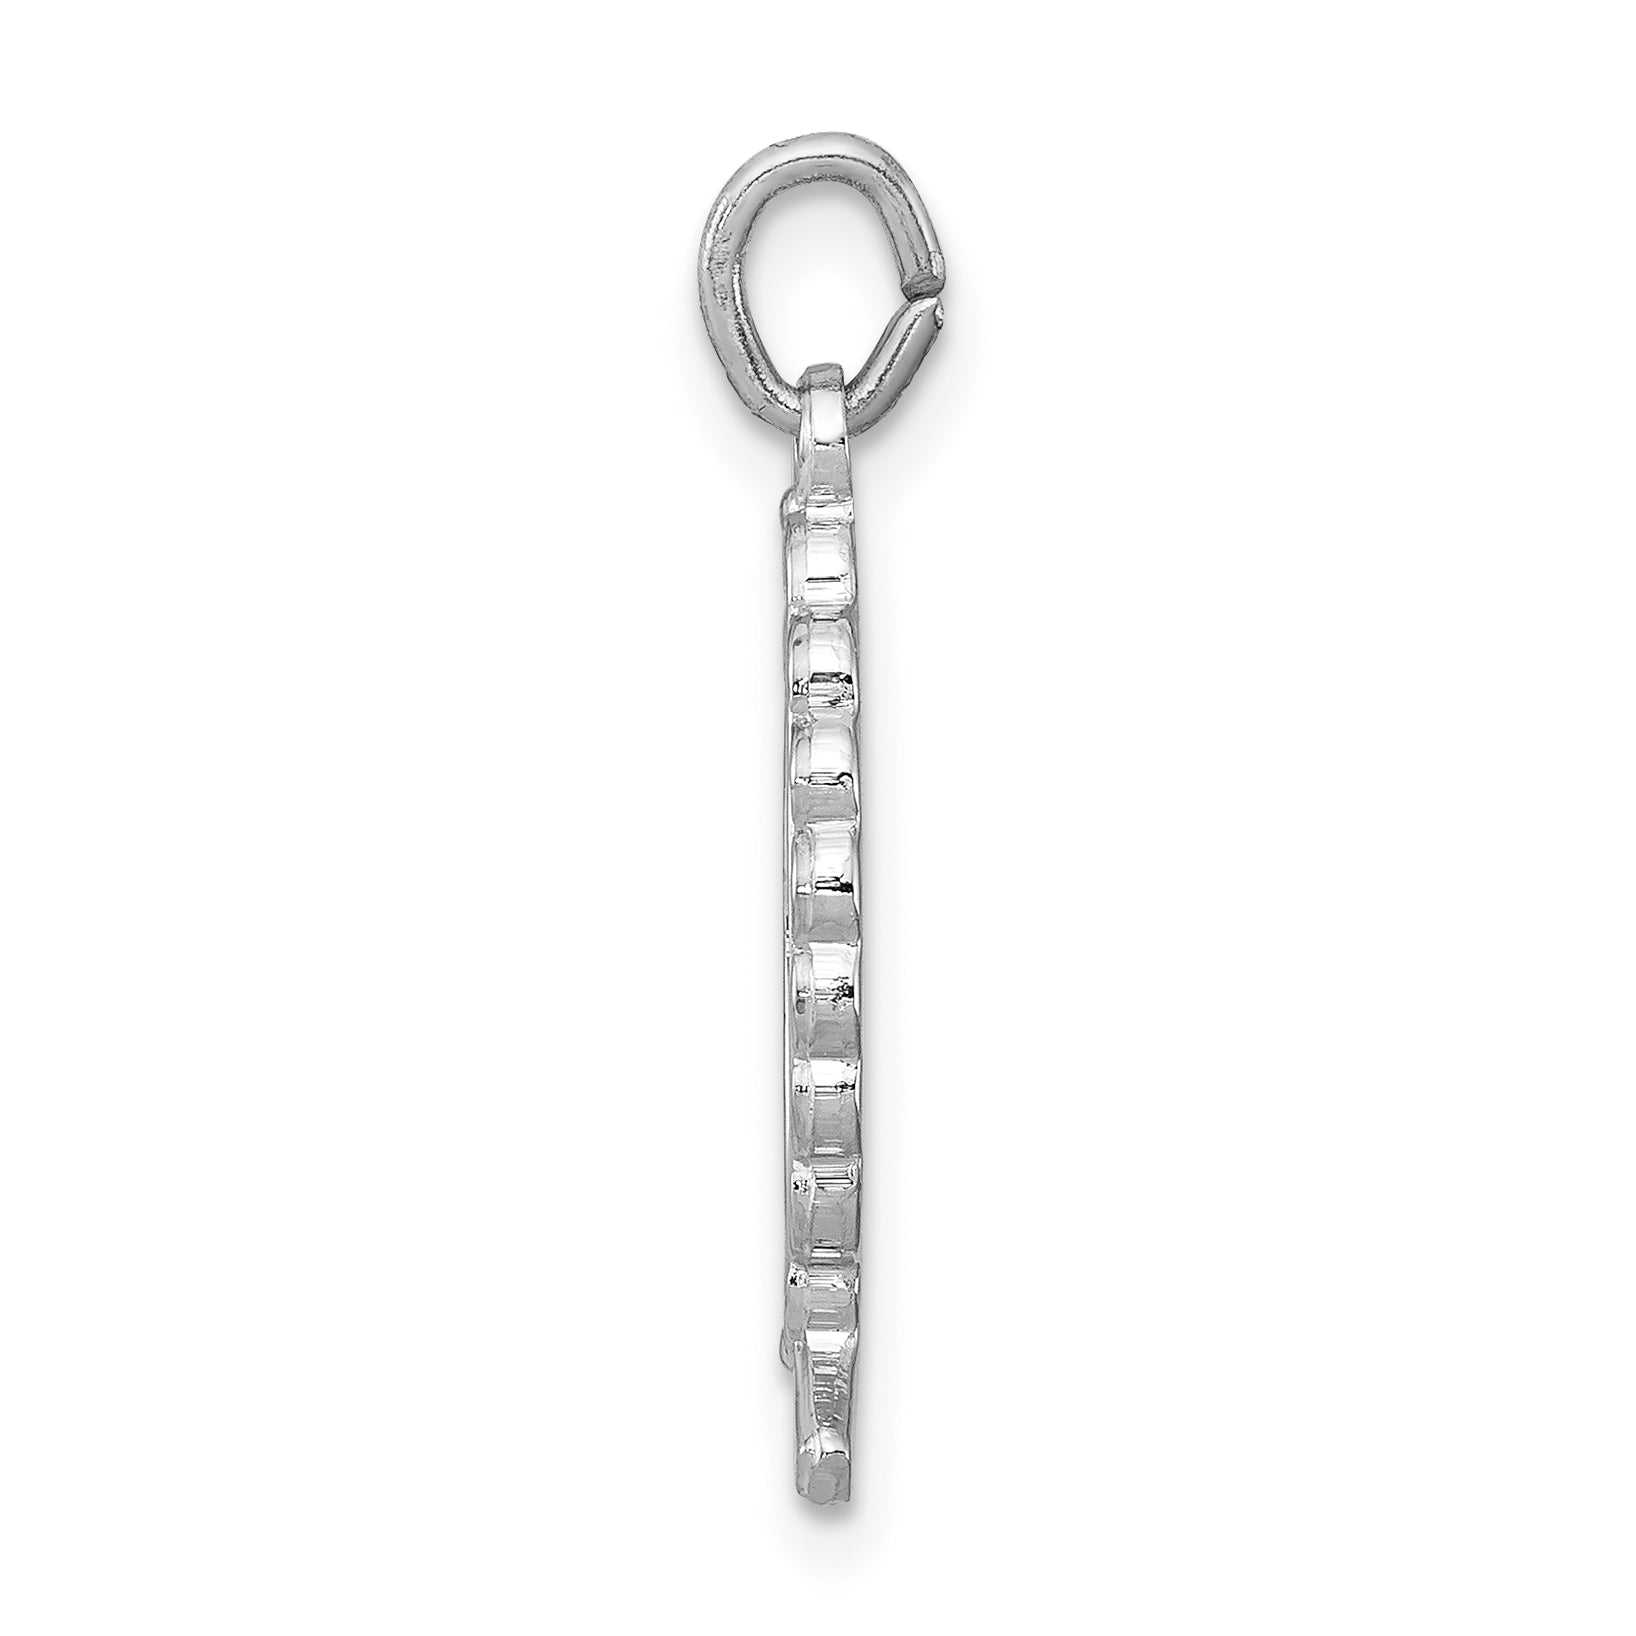 Sterling Silver Rhodium-plated Ichthus Fish Charm